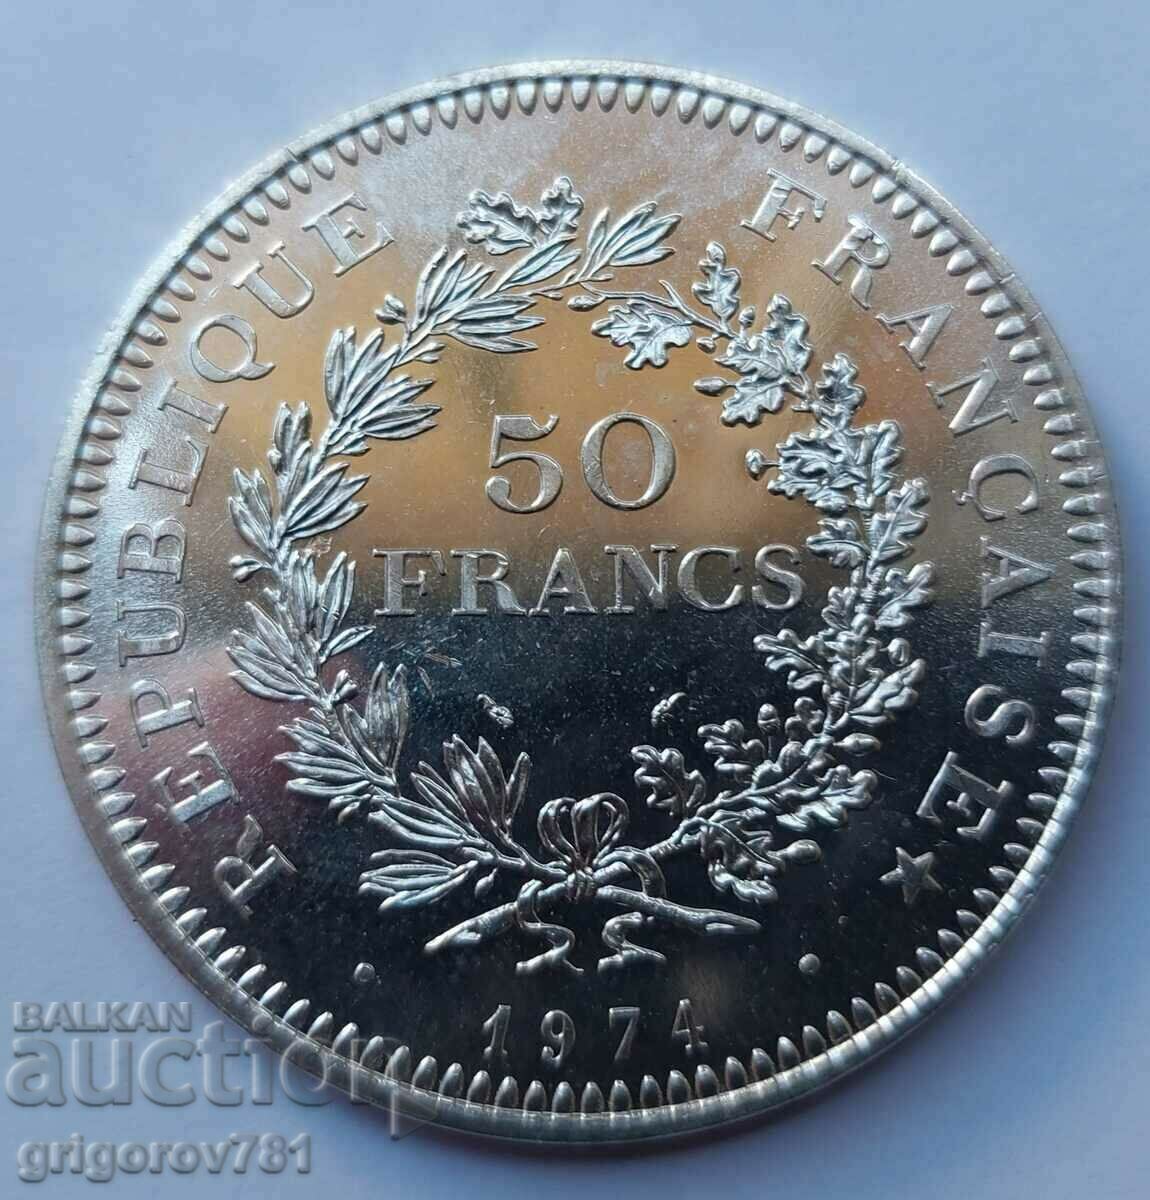 50 Francs Silver France 1974 - Silver Coin #6